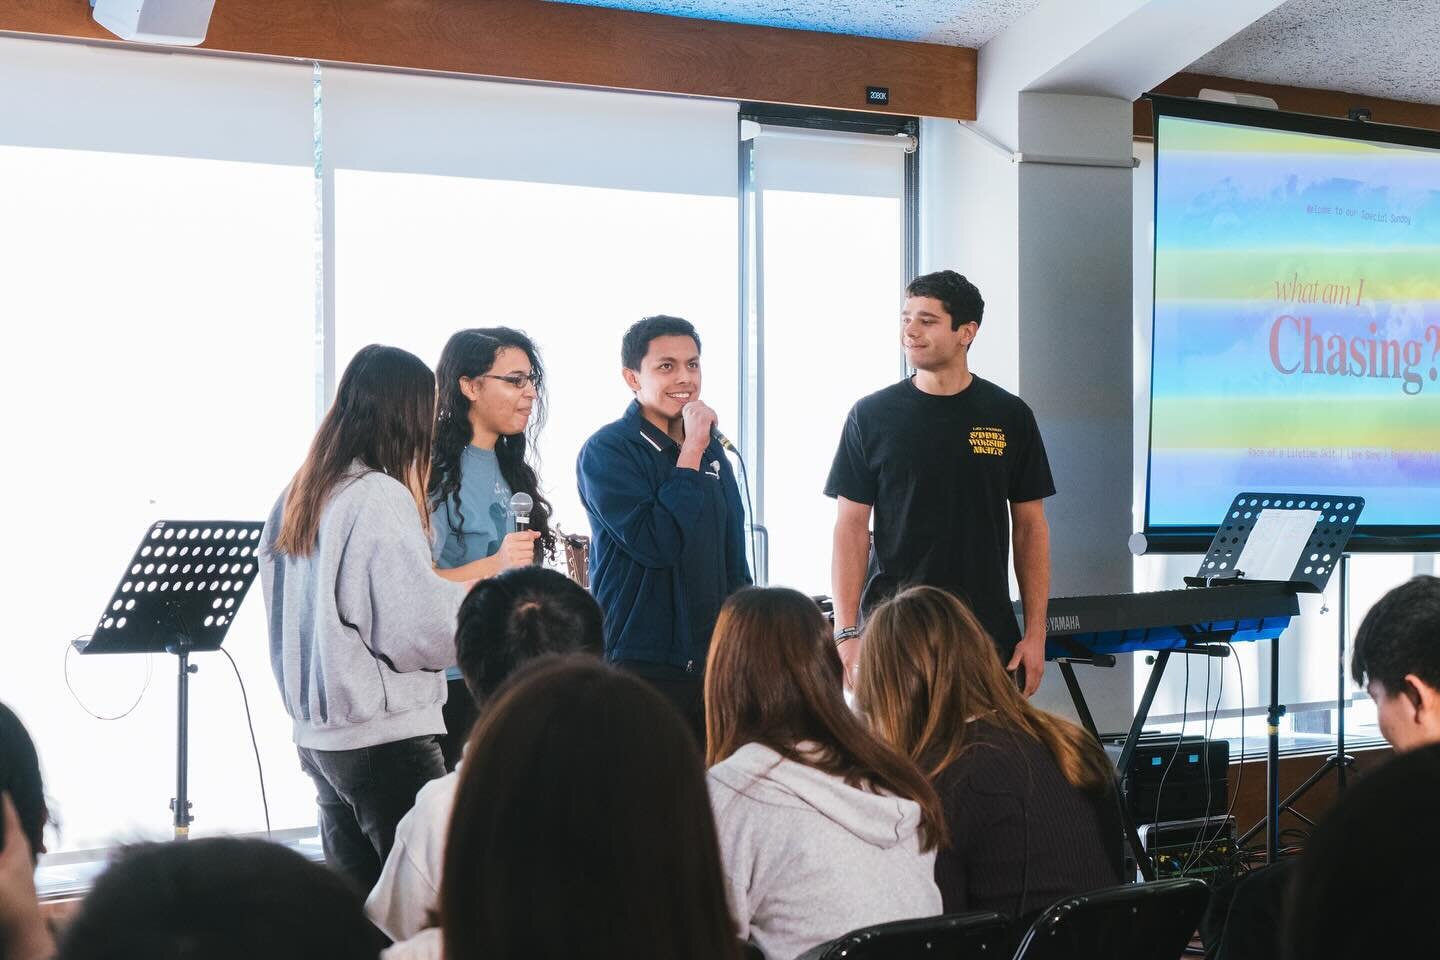 Join us for Sunday Service this week :)
A time to recharge and reconnect with God as midterms wrap up ~ see you there!

🚨NEW LOCATION: Bruin Viewpoint Room (next to UCLA Blood Center / UCLA textbooks)
TIME: 11:30am